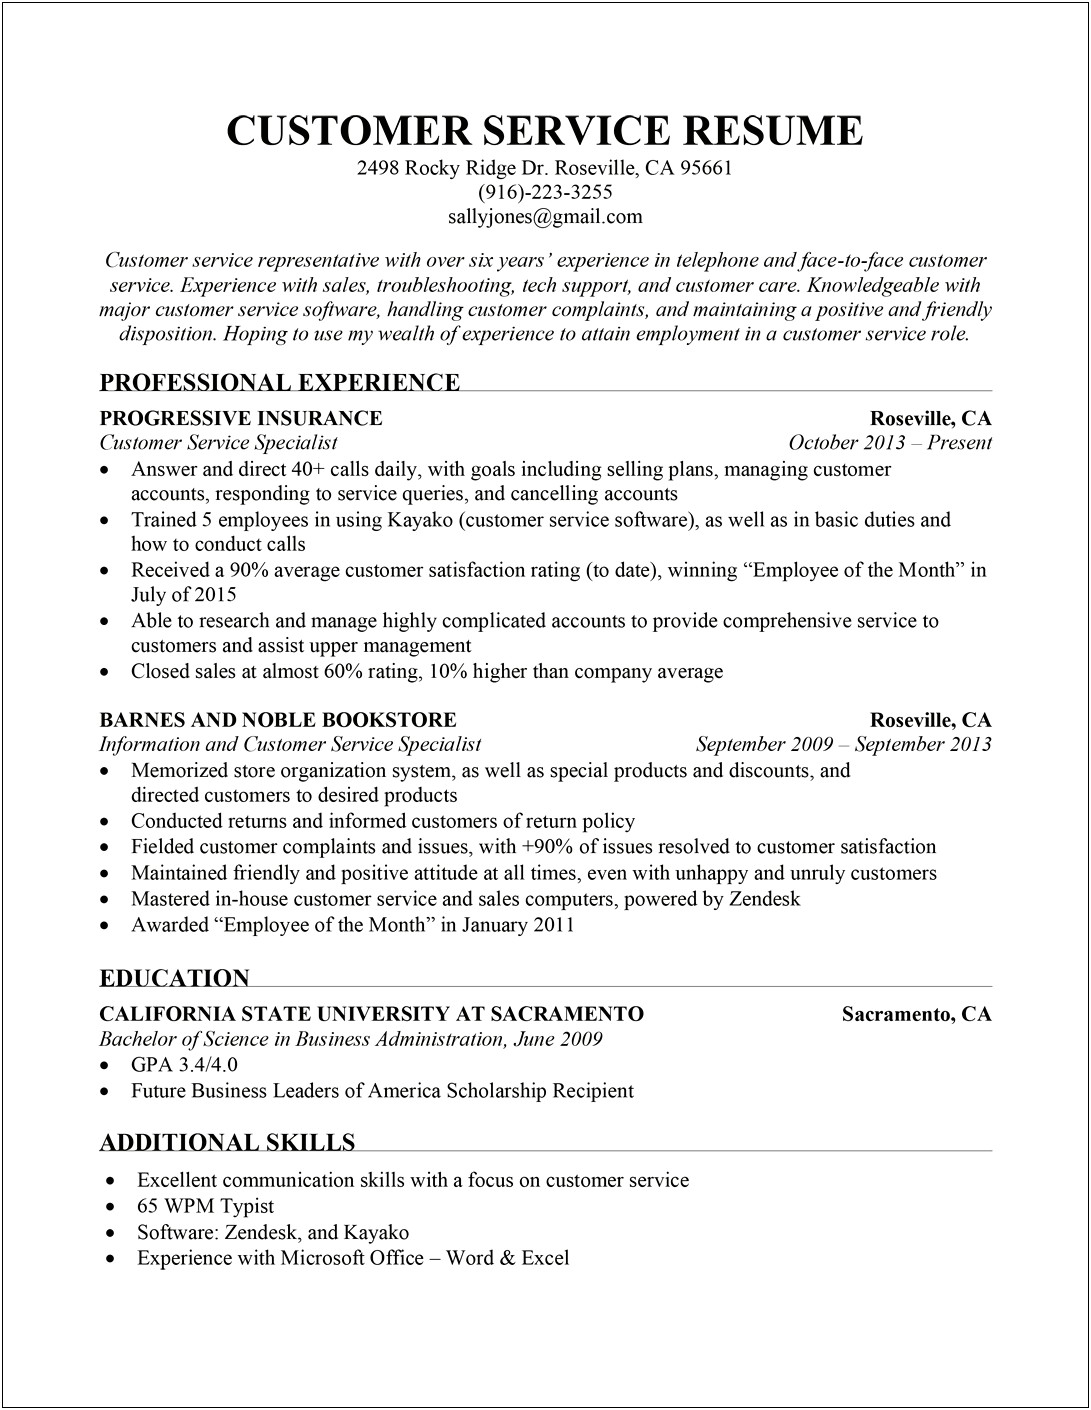 Sample Resume For Call Center Agent With Experience